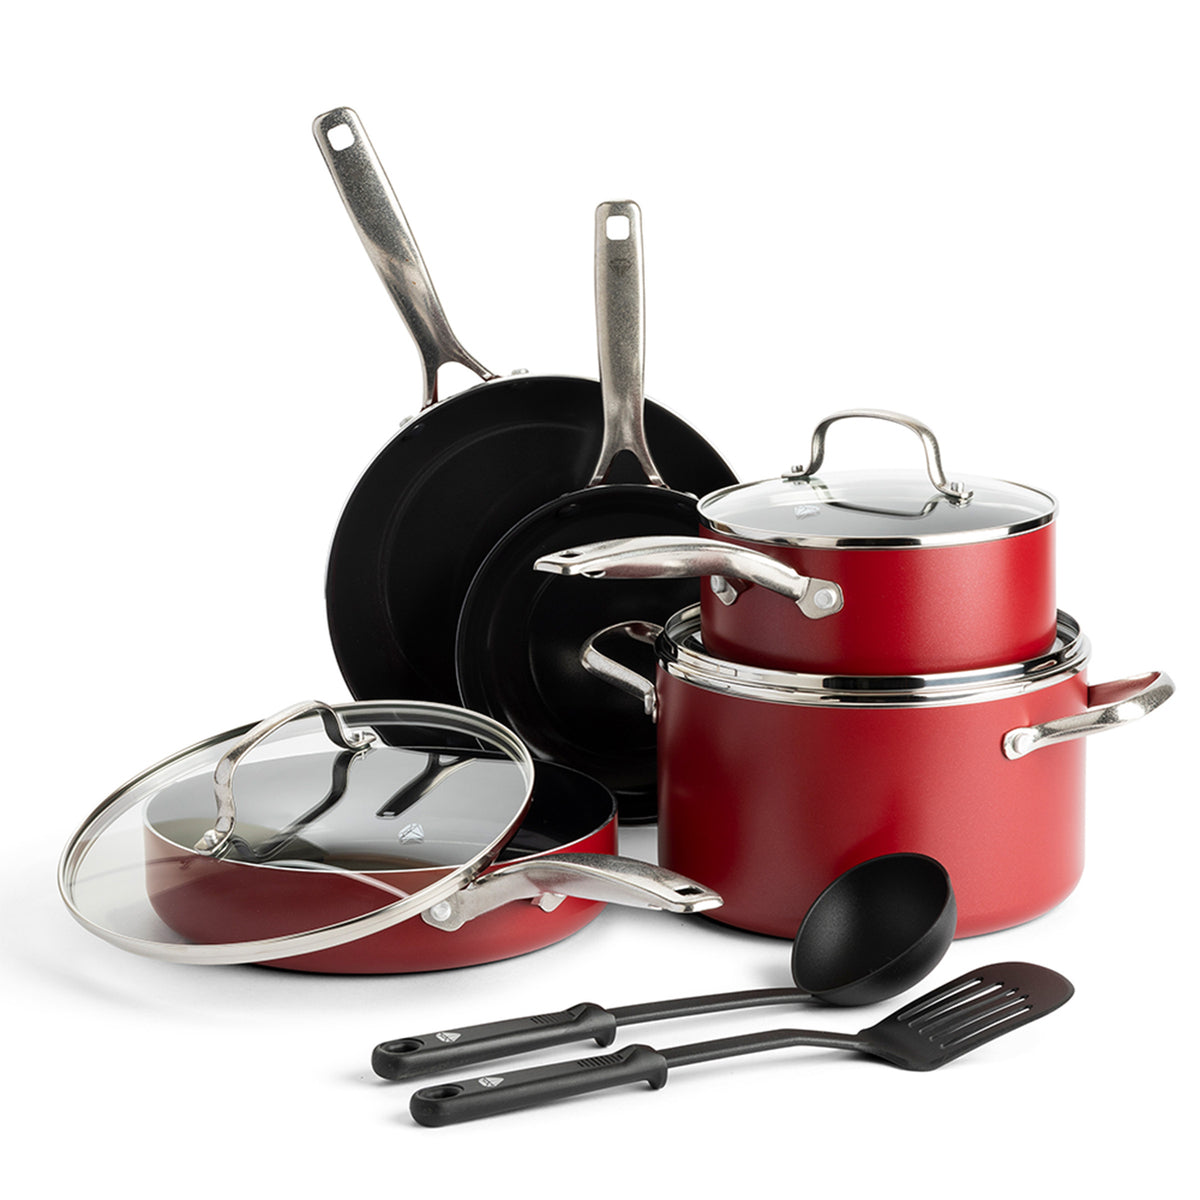 Choice 2-Piece Aluminum Non-Stick Fry Pan Set with Red Silicone Handles -  8 and 10